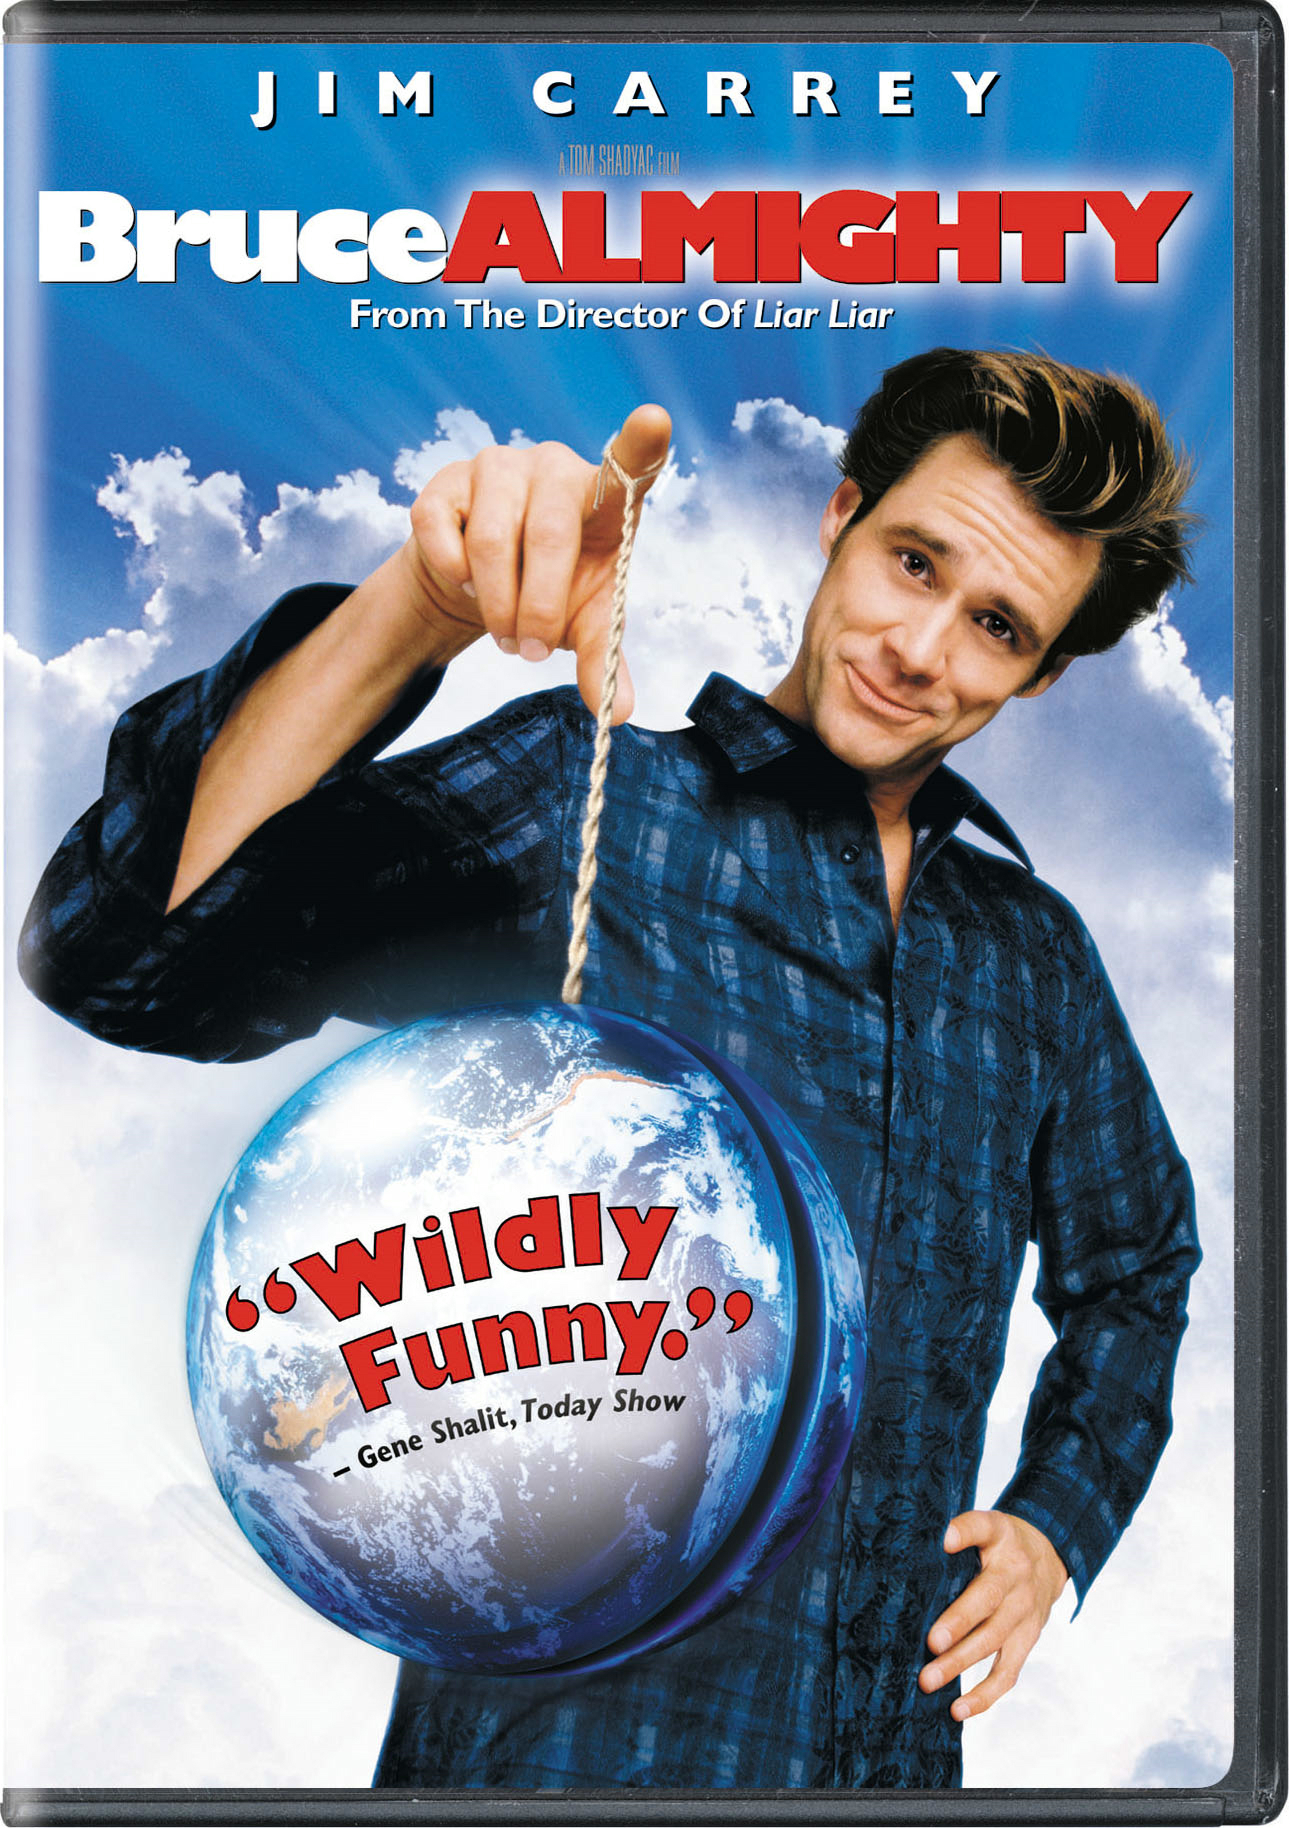 Bruce Almighty (Widescreen) - DVD [ 2003 ]  - Comedy Movies On DVD - Movies On GRUV